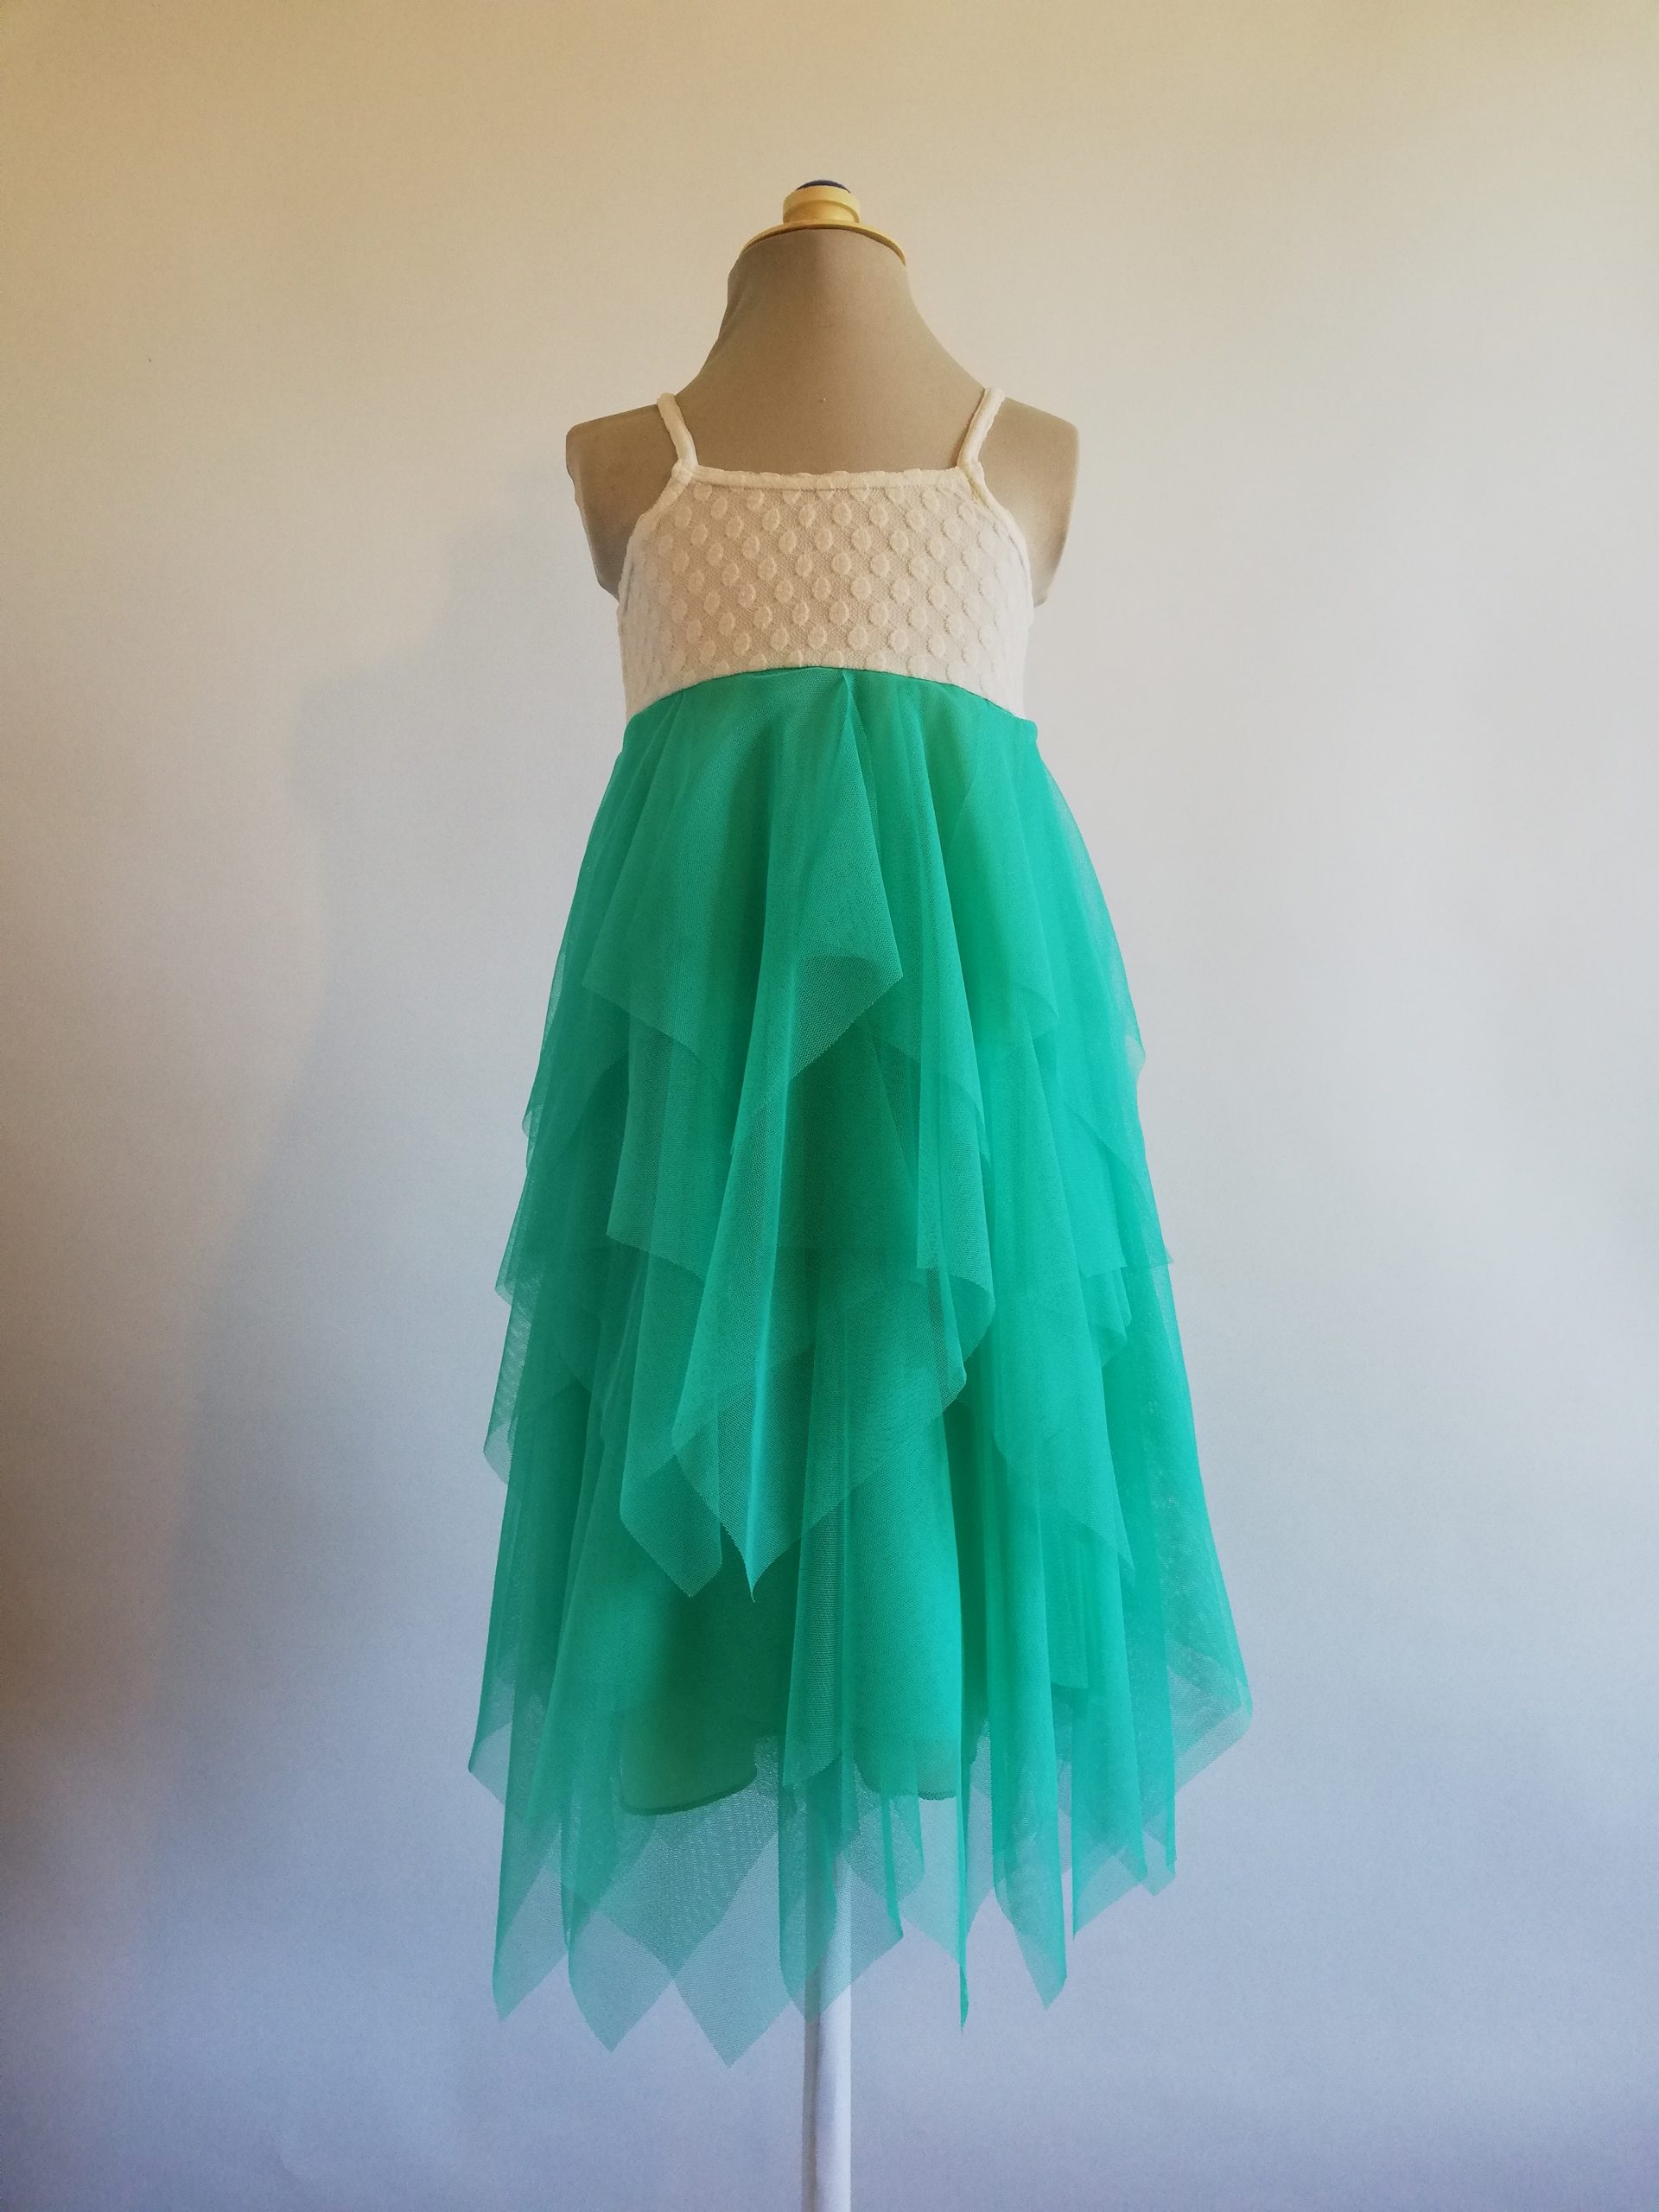 Tiered Tulle Dress - The Fairy Shop